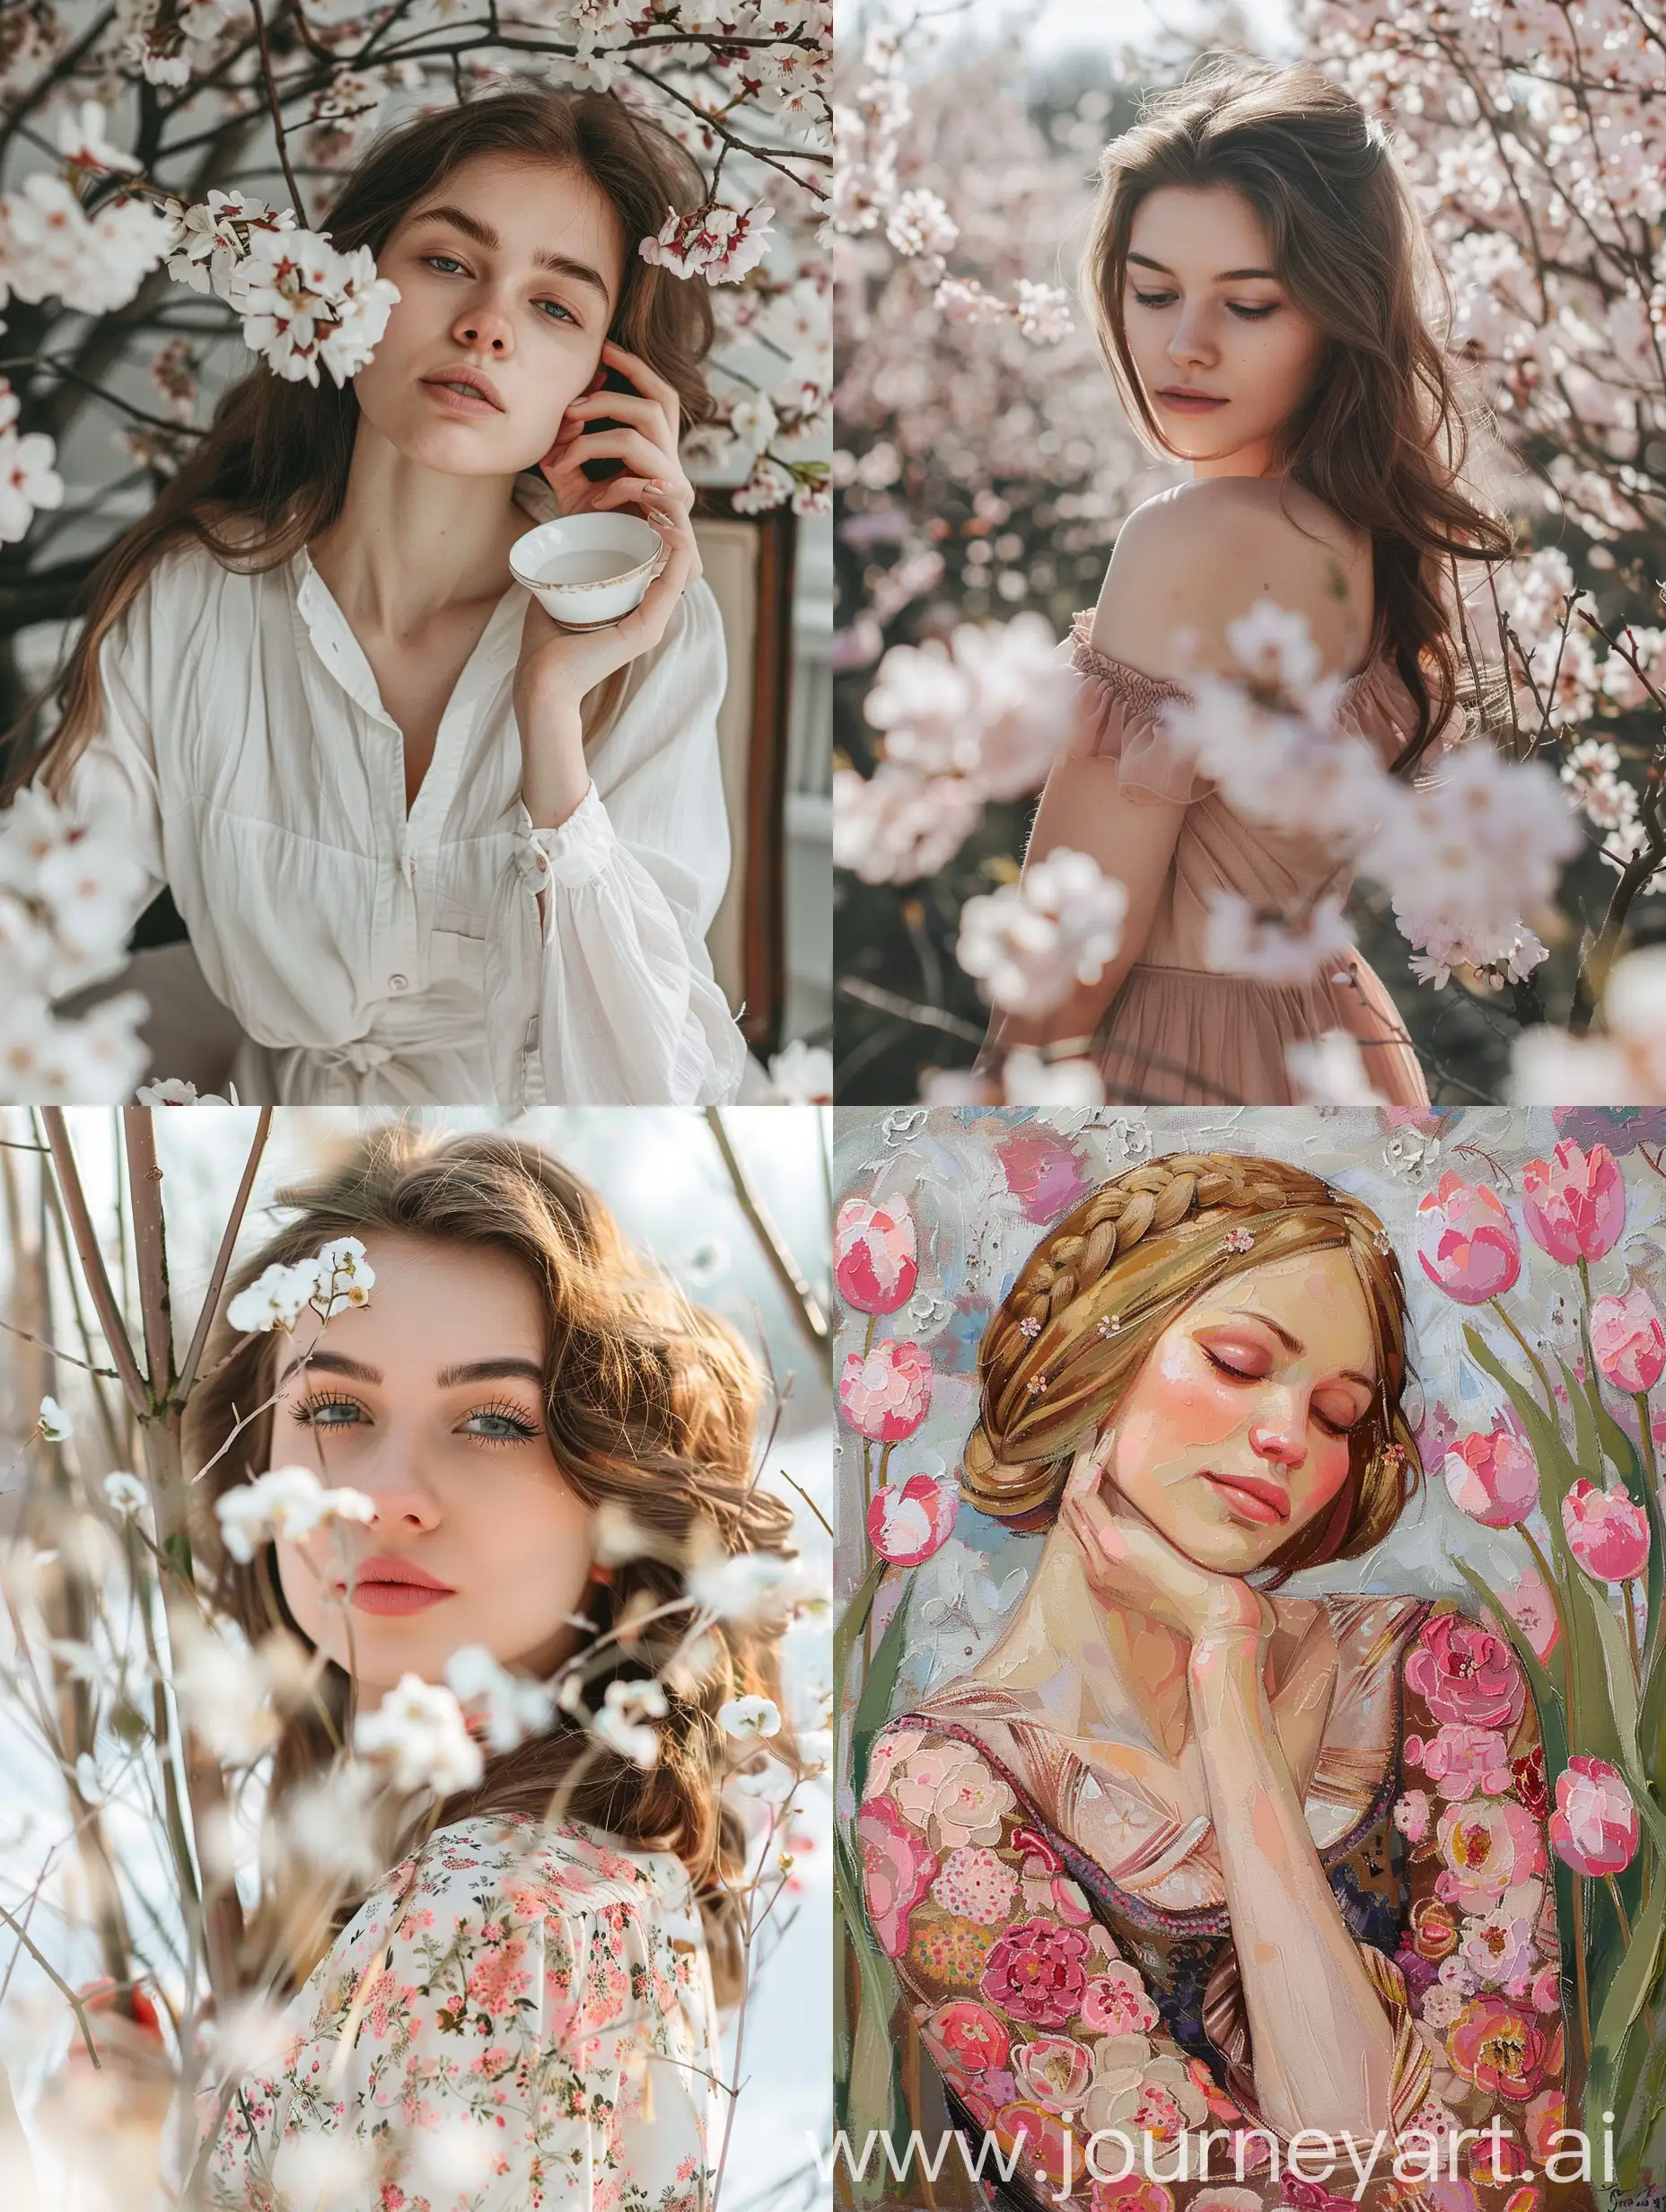 Women's day in Russia, spring vibes